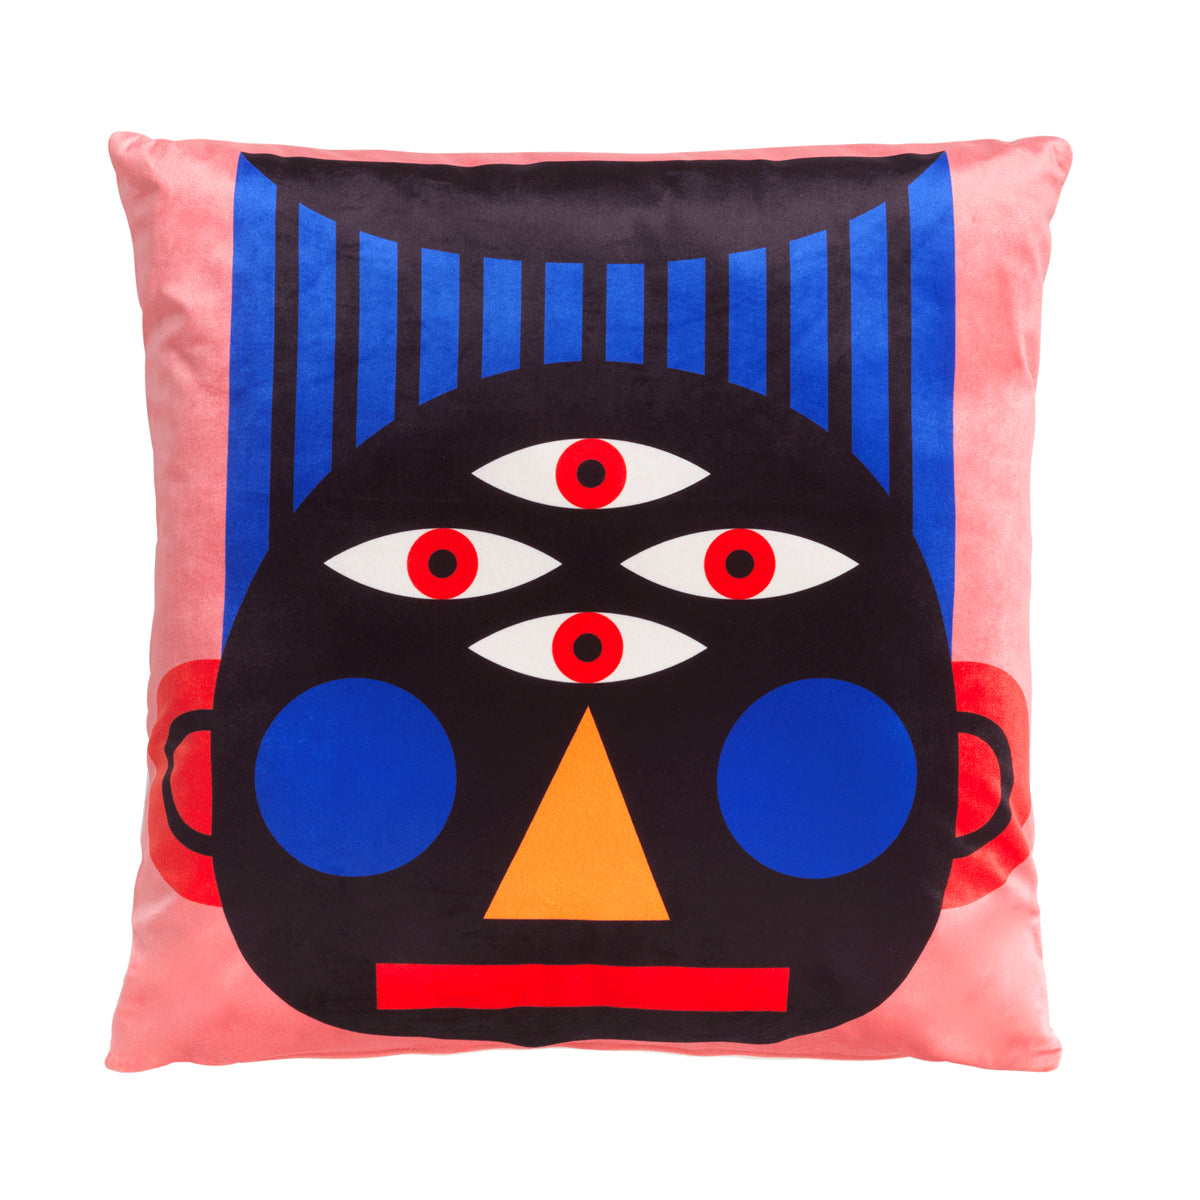 Oggian Face Cushion Cover by Marco Oggian - Qeeboo